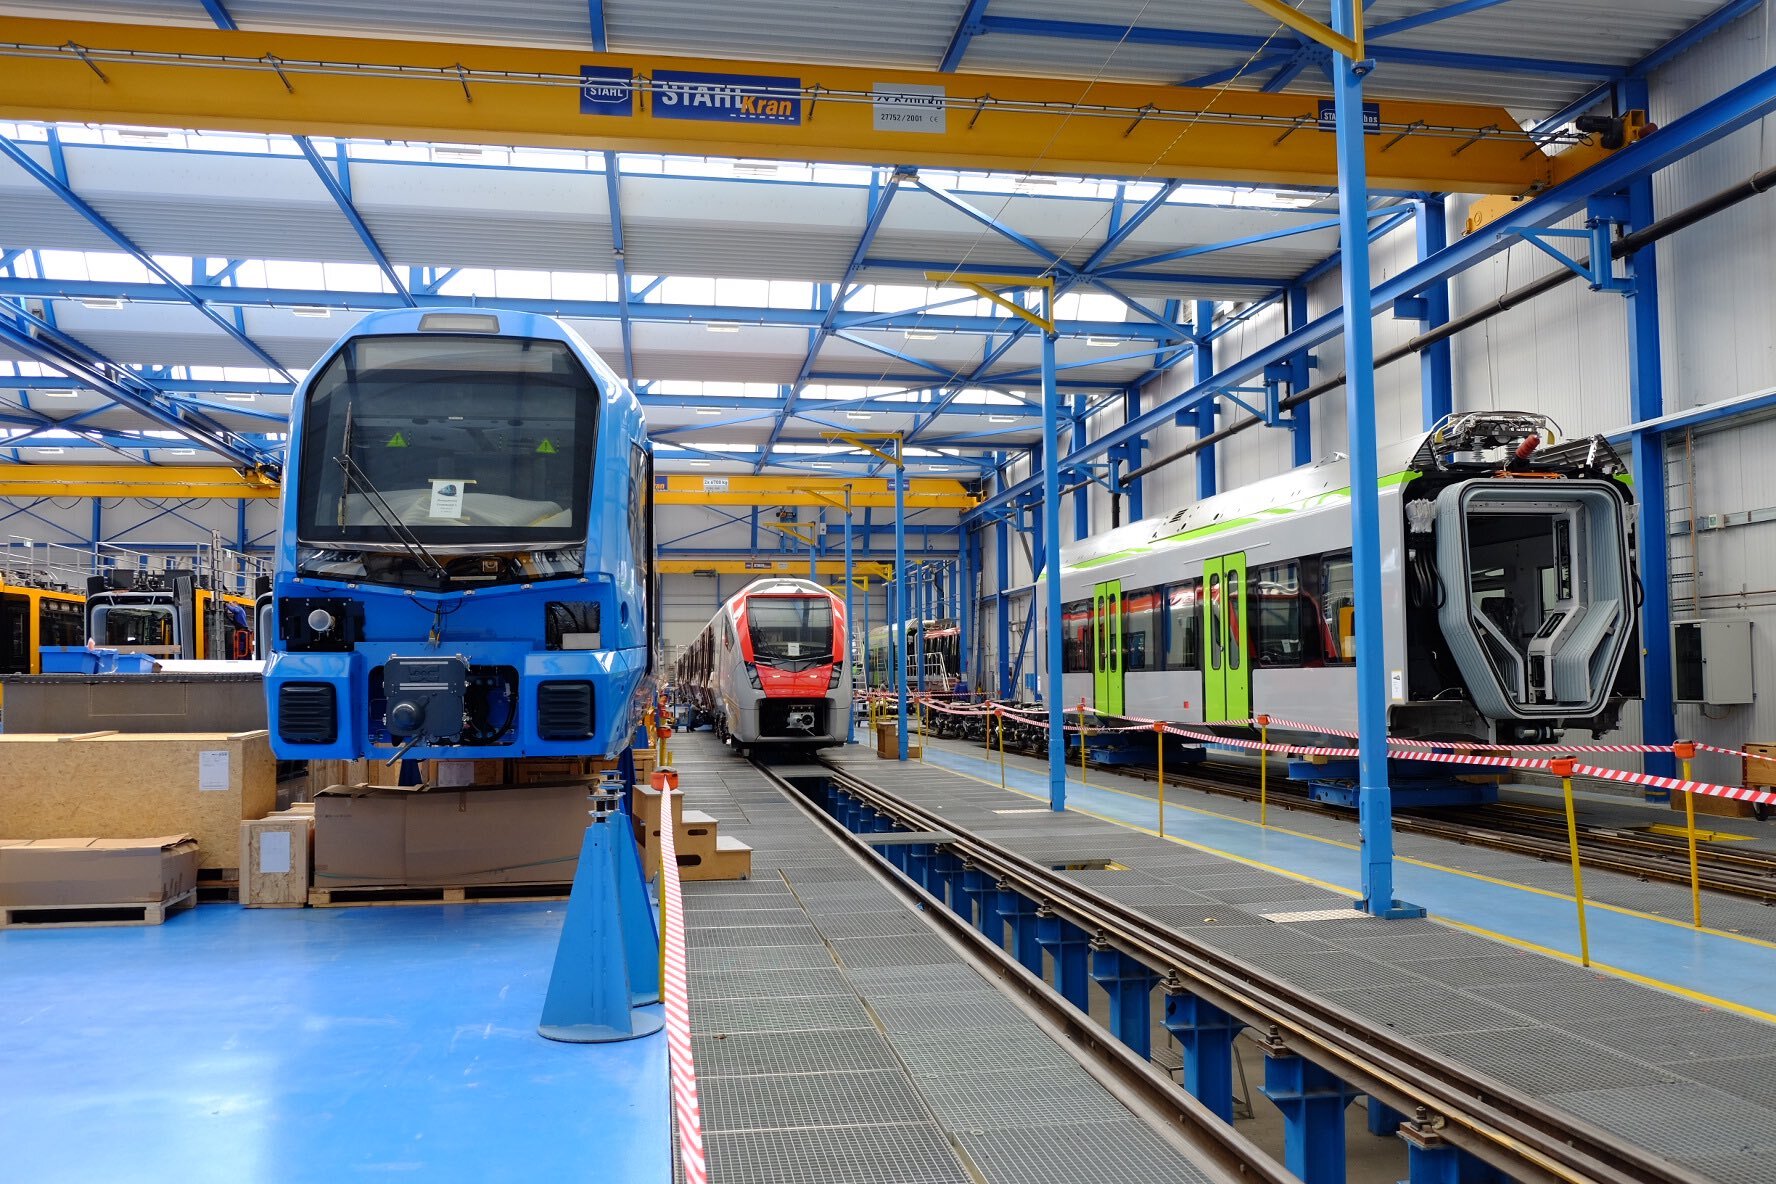 Manufacture of Stadler EMUs at the Bussnang plant in Switzerland